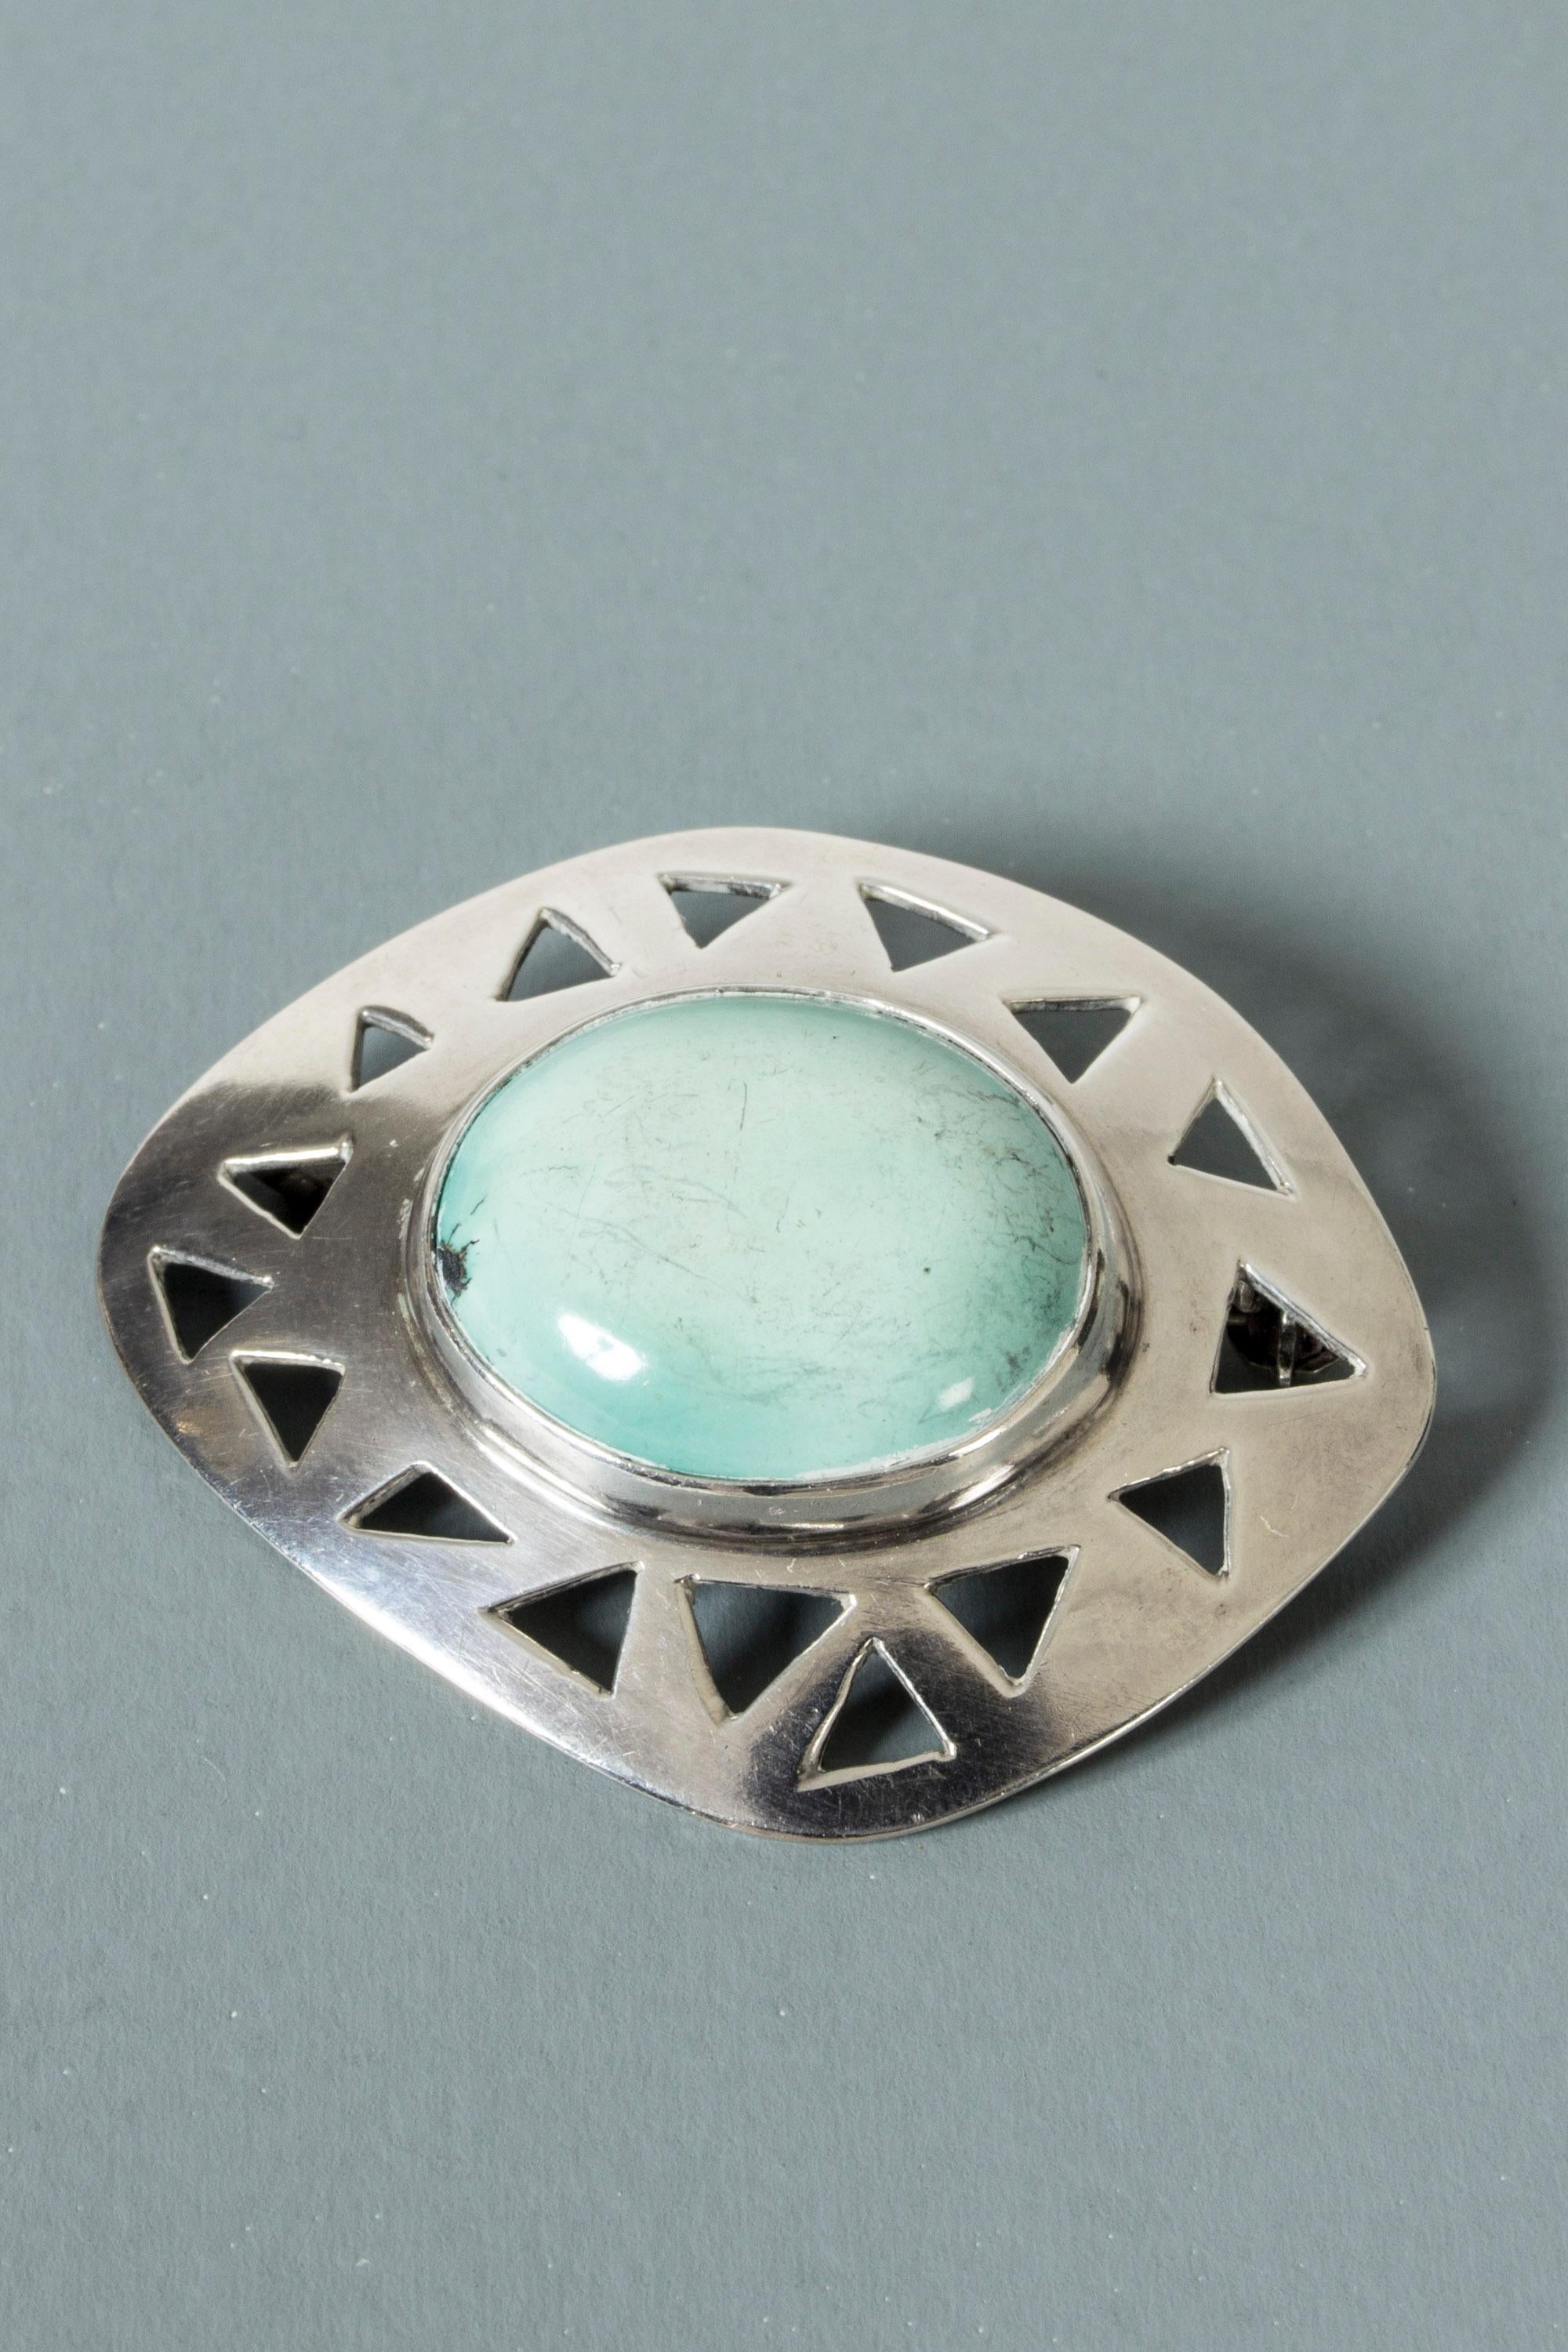 Oval Cut Silver and Turquoise Brooch from Michelsen, Sweden, 1953